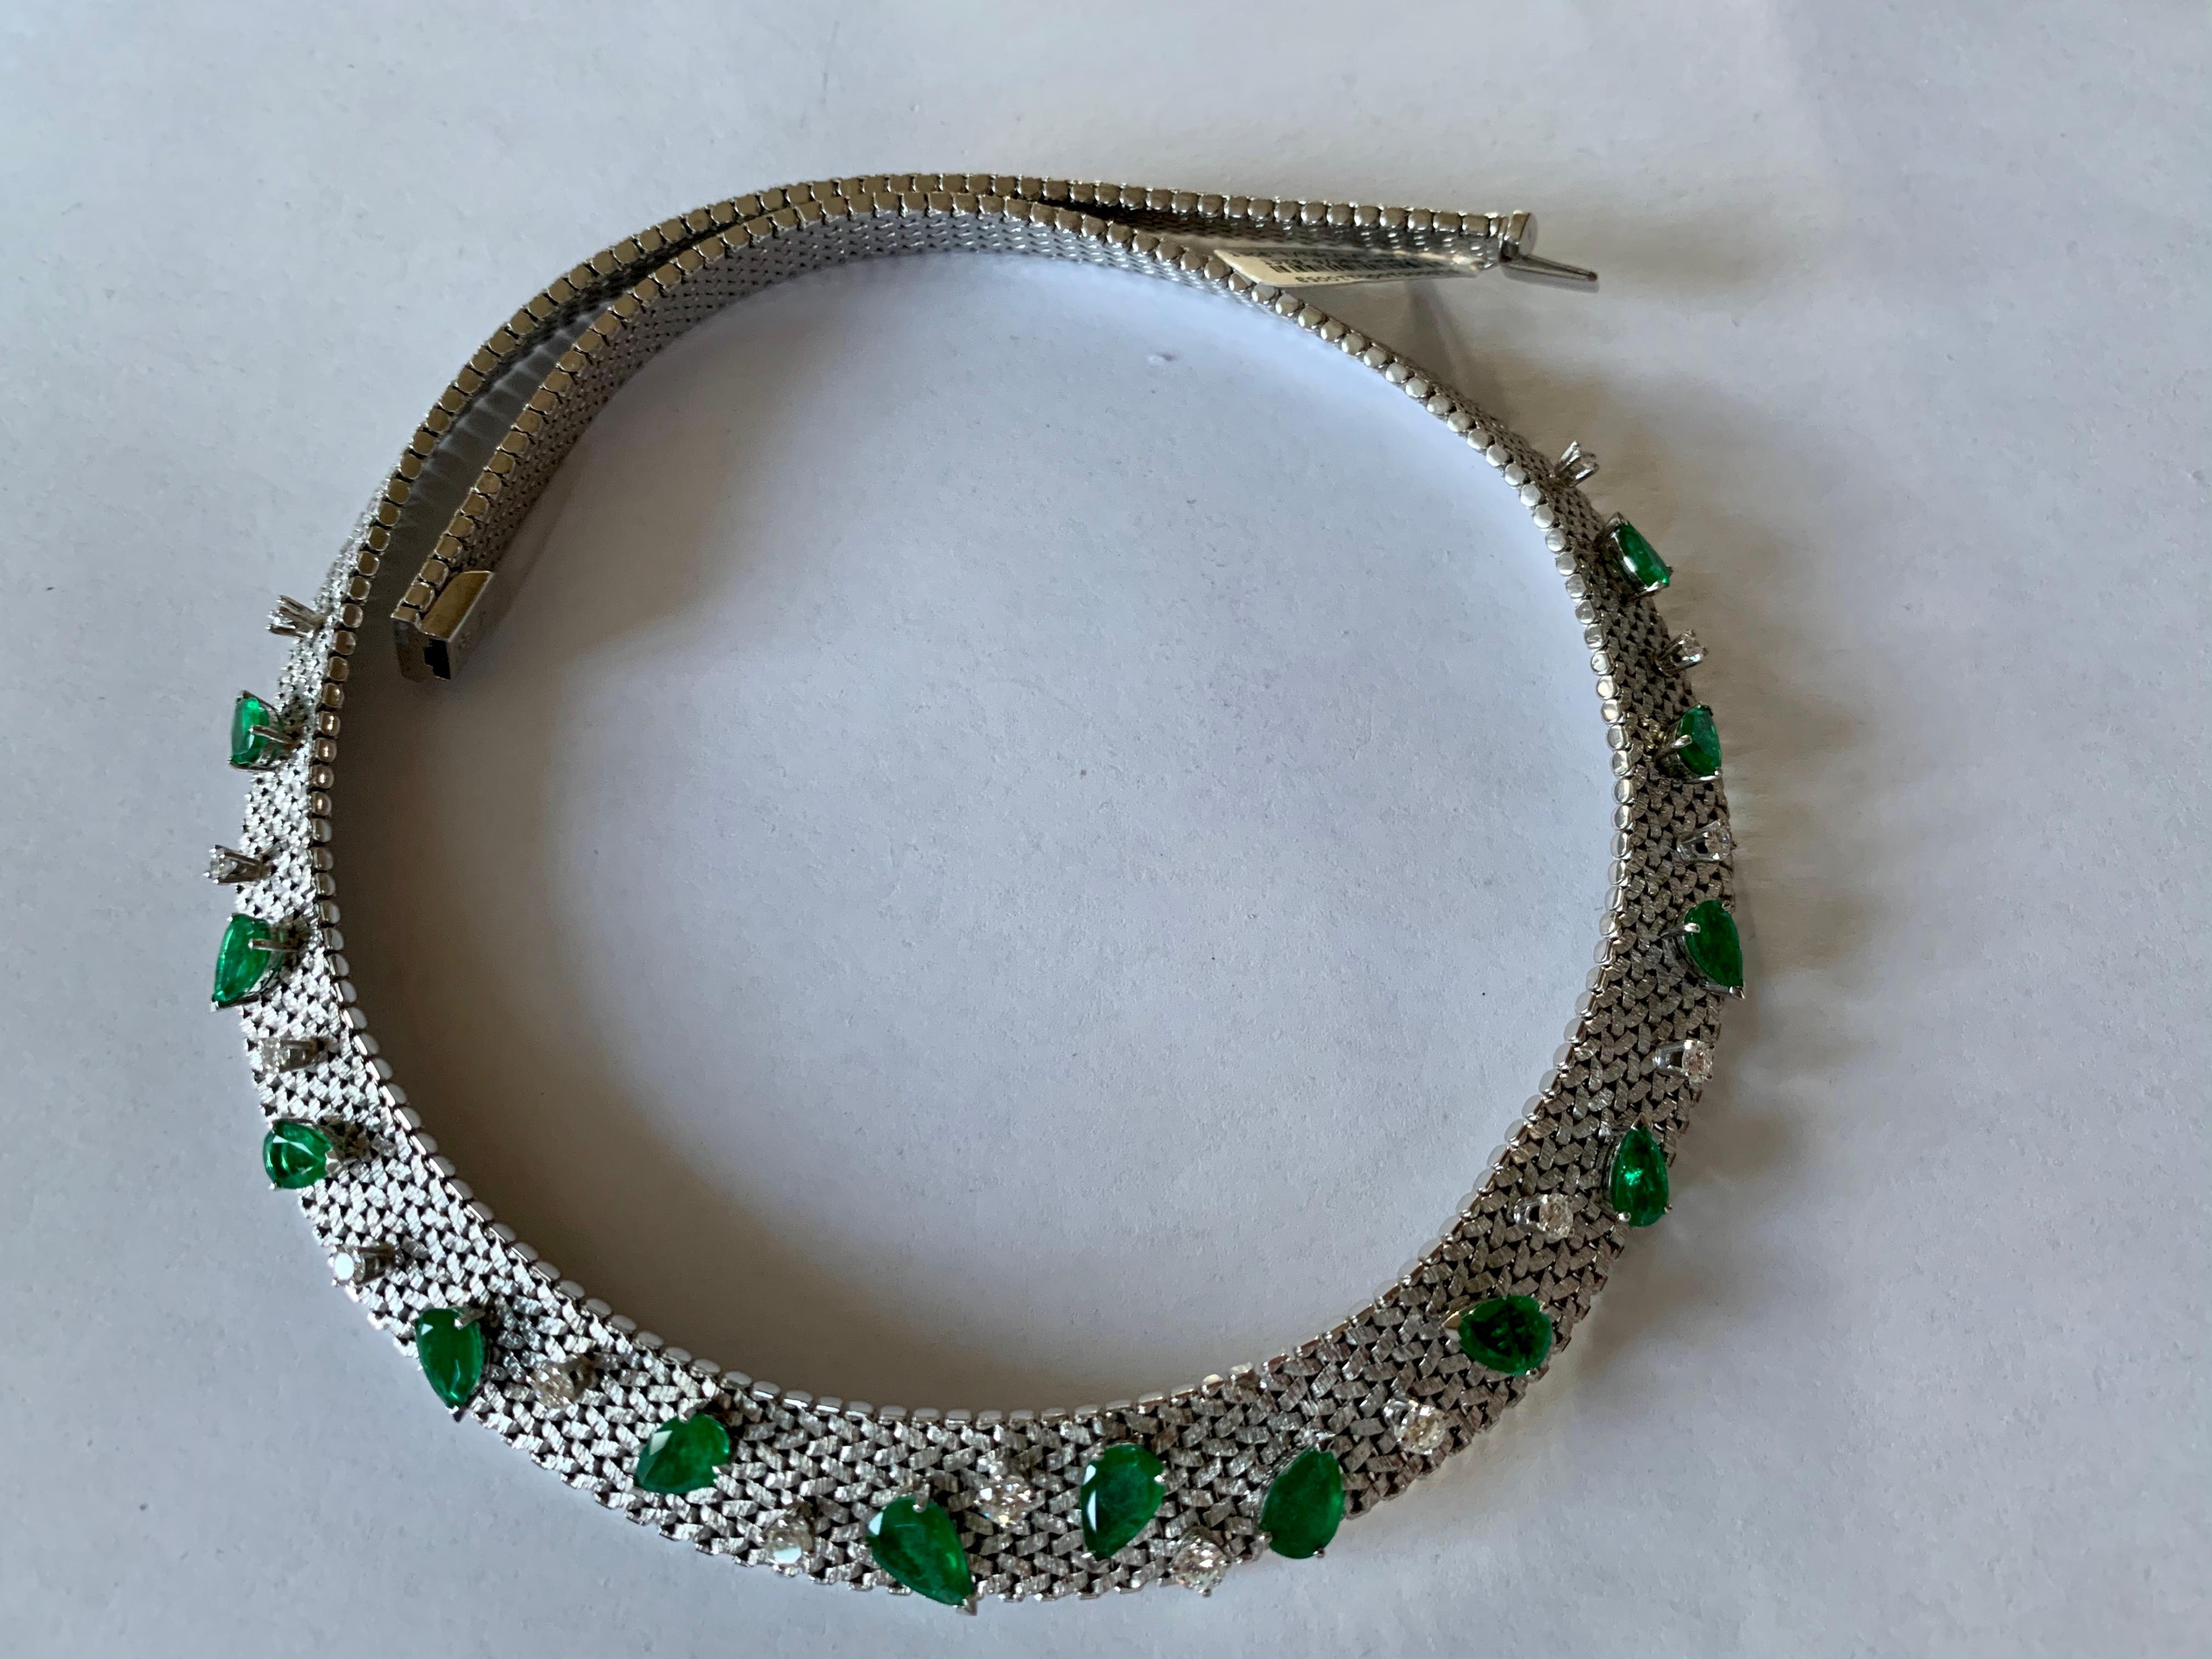 This vintage 1970s Diamond and Emerald necklace features a flat necklace and is set with 14 brilliant cut Diamonds weighing 1.30 ct, G, vs and 13 pear shaped Emeralds totaling 6.82 ct. 
This fine and impressive necklace has been crafted in 18 carat